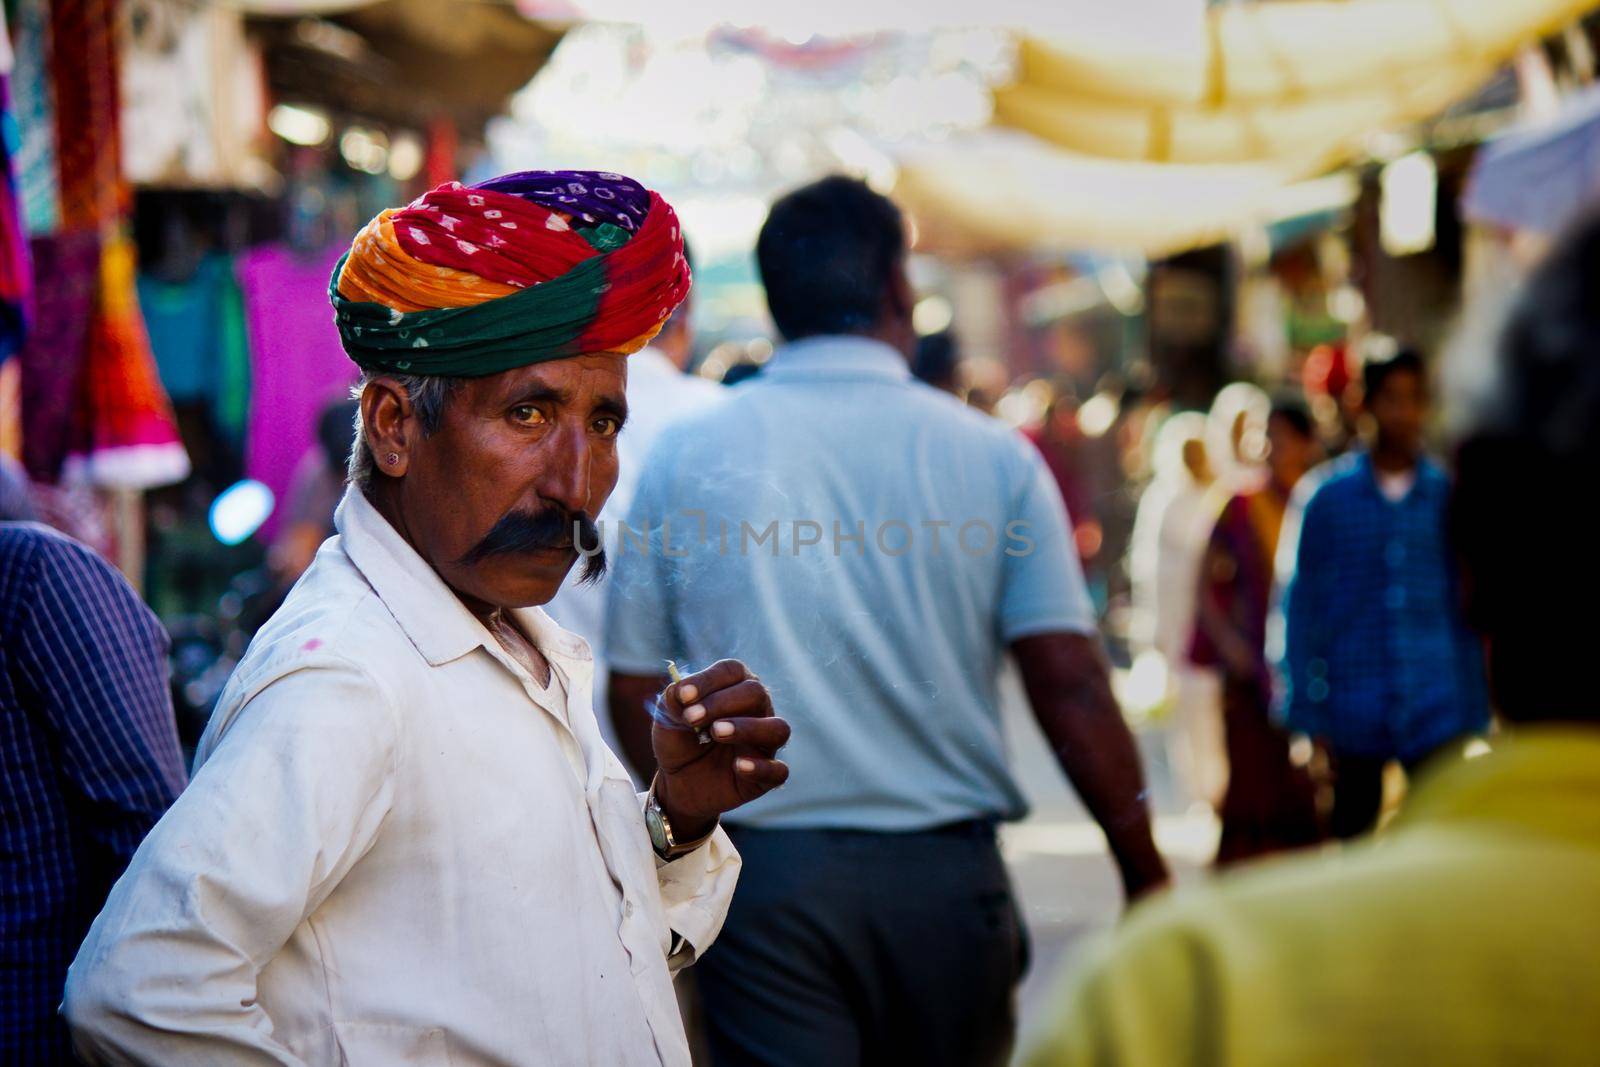 Pushkar, India - NOVEMBER 10, 2016: An old Rajasthani man in traditional ethnic wear such as colorful turban and typical white shirt smoking cigarette or mini-cigar filled with tobacco by arpanbhatia